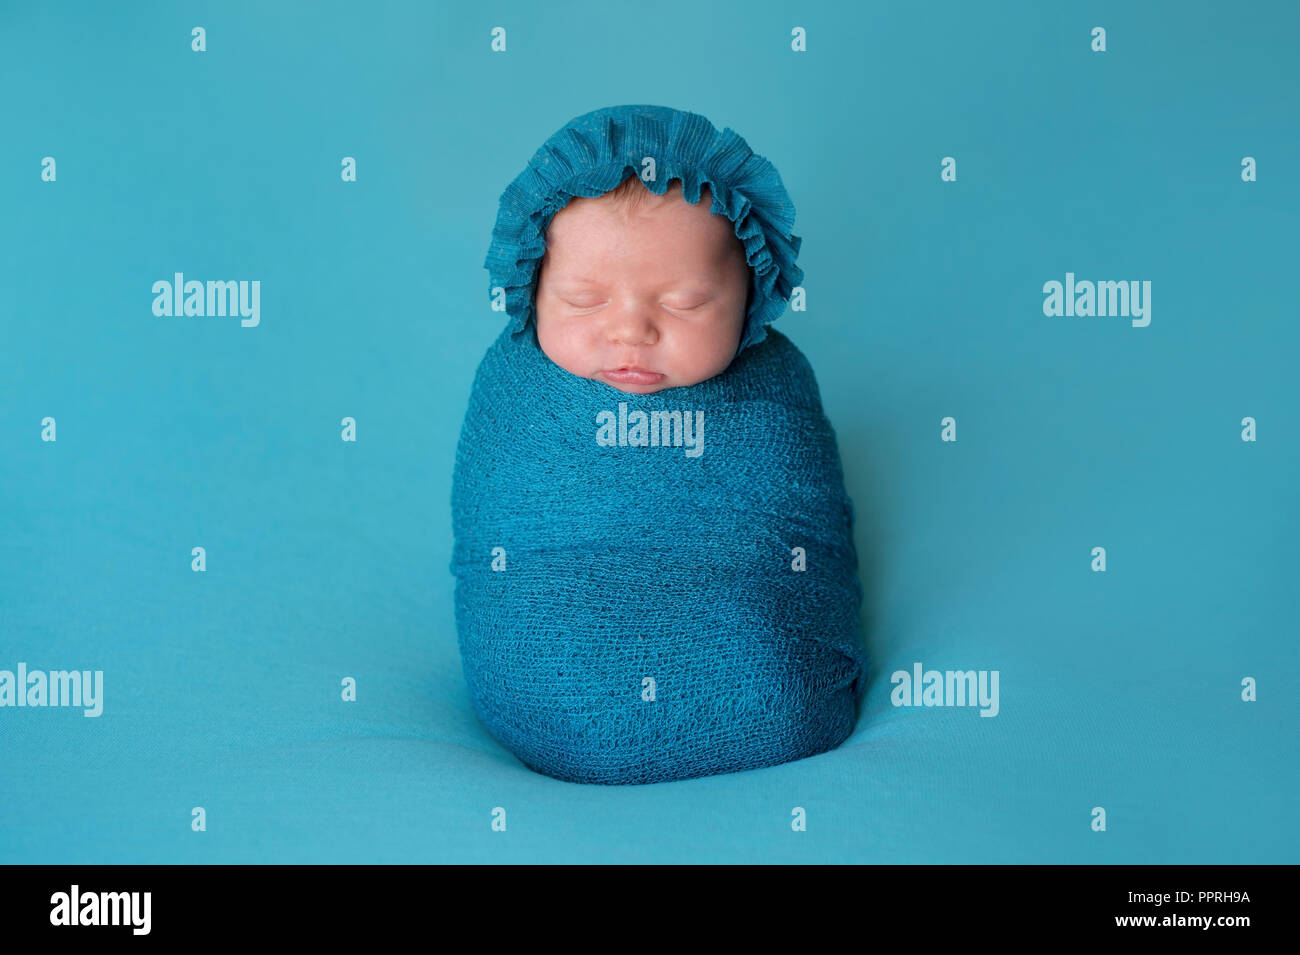 A three week old newborn baby girl wearing a turquoise blue bonnet. She is sleeping upright while swaddled in a stretch wrap. Stock Photo